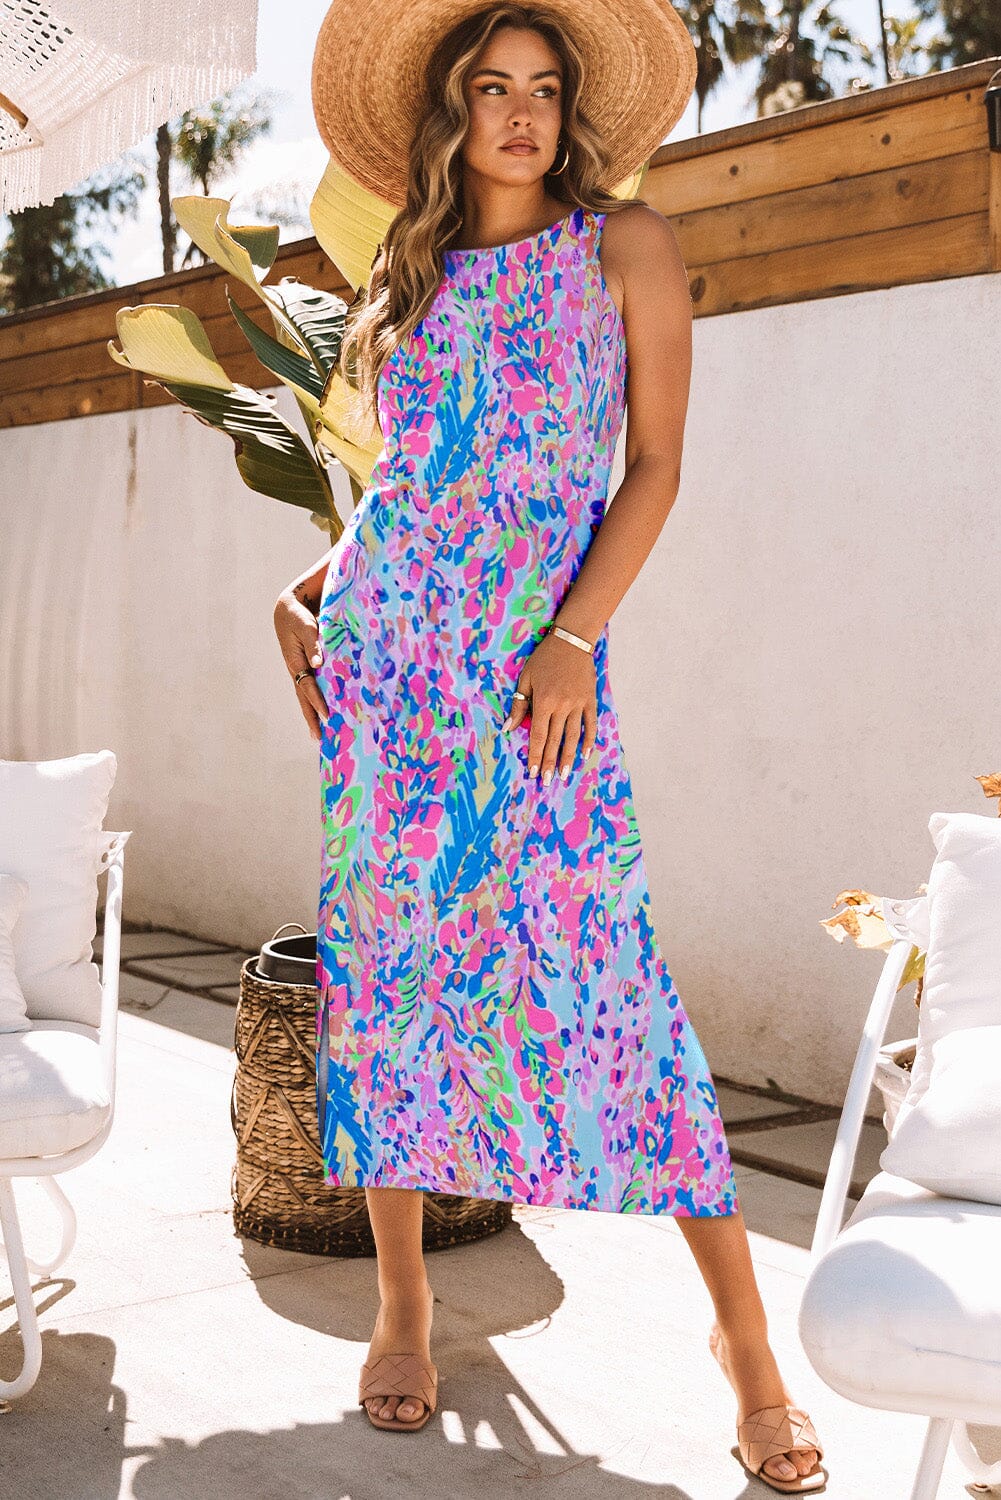 KaleaBoutique Stylish Beautiful Abstract Floral Print Sleeveless Maxi Dress - KaleaBoutique.com